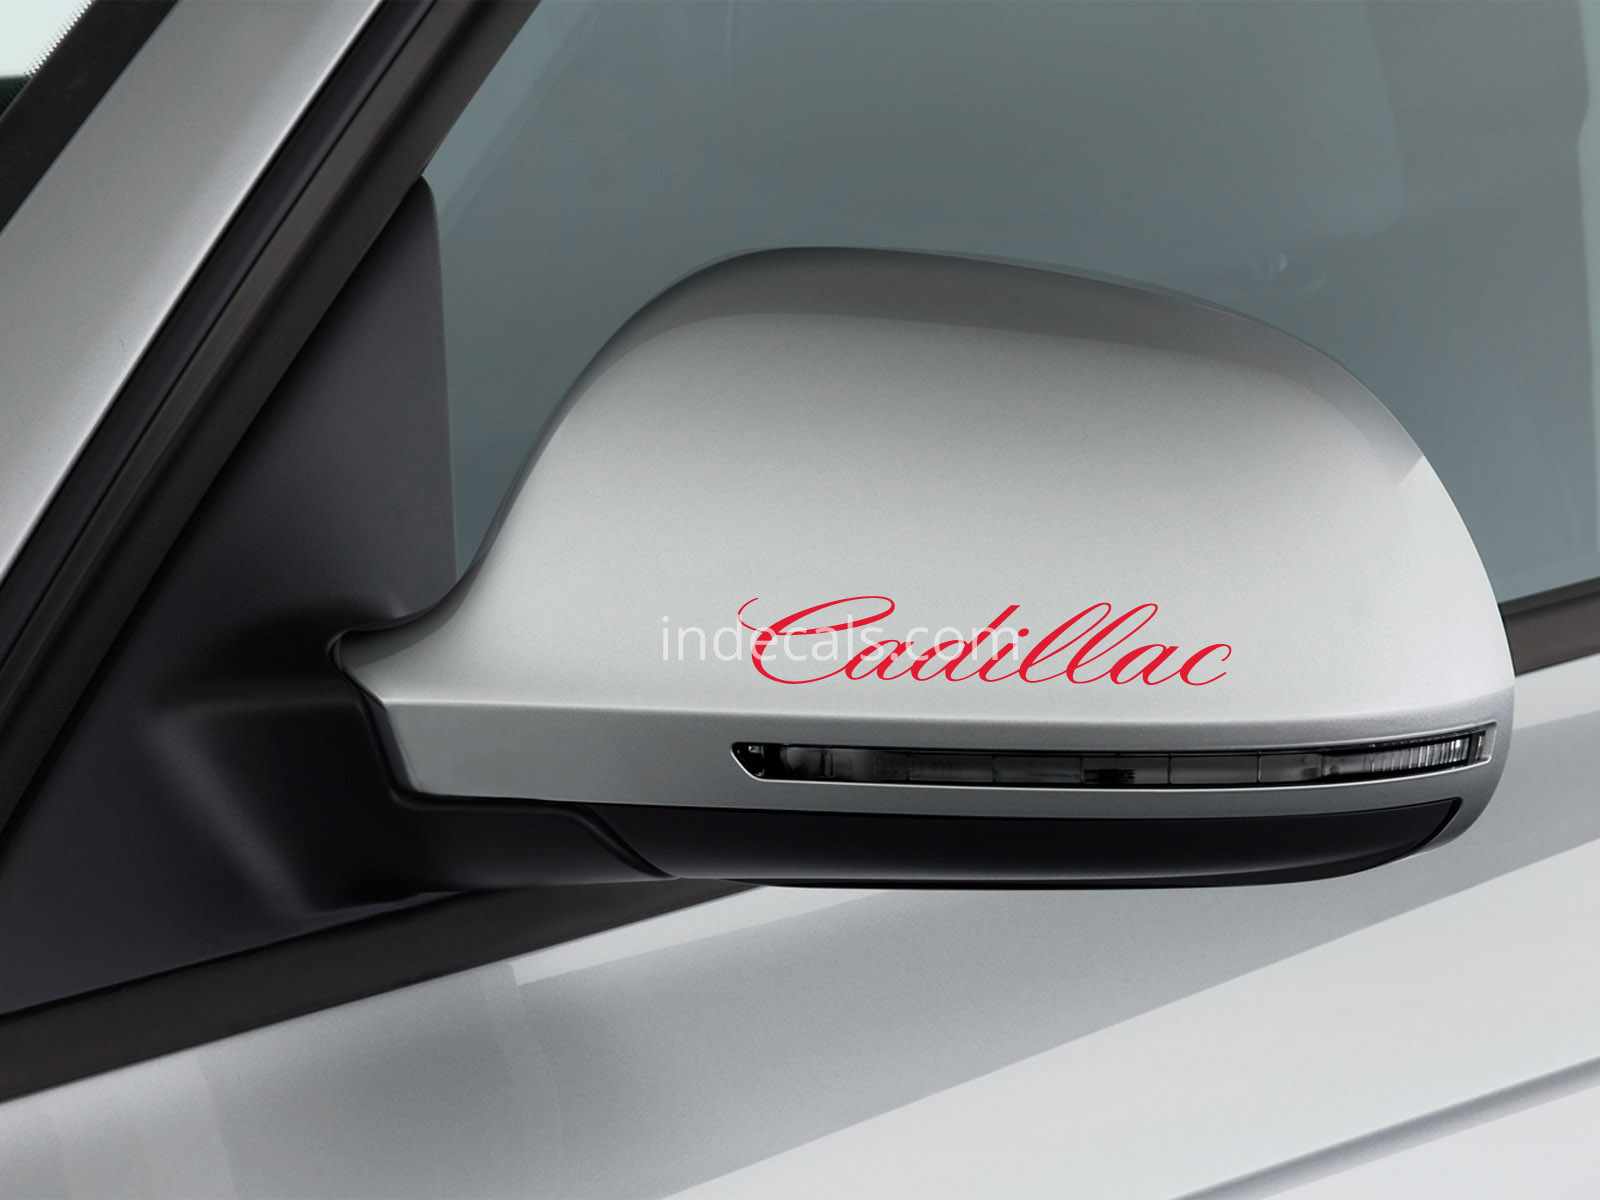 3 x Cadillac Stickers for Mirrors - White